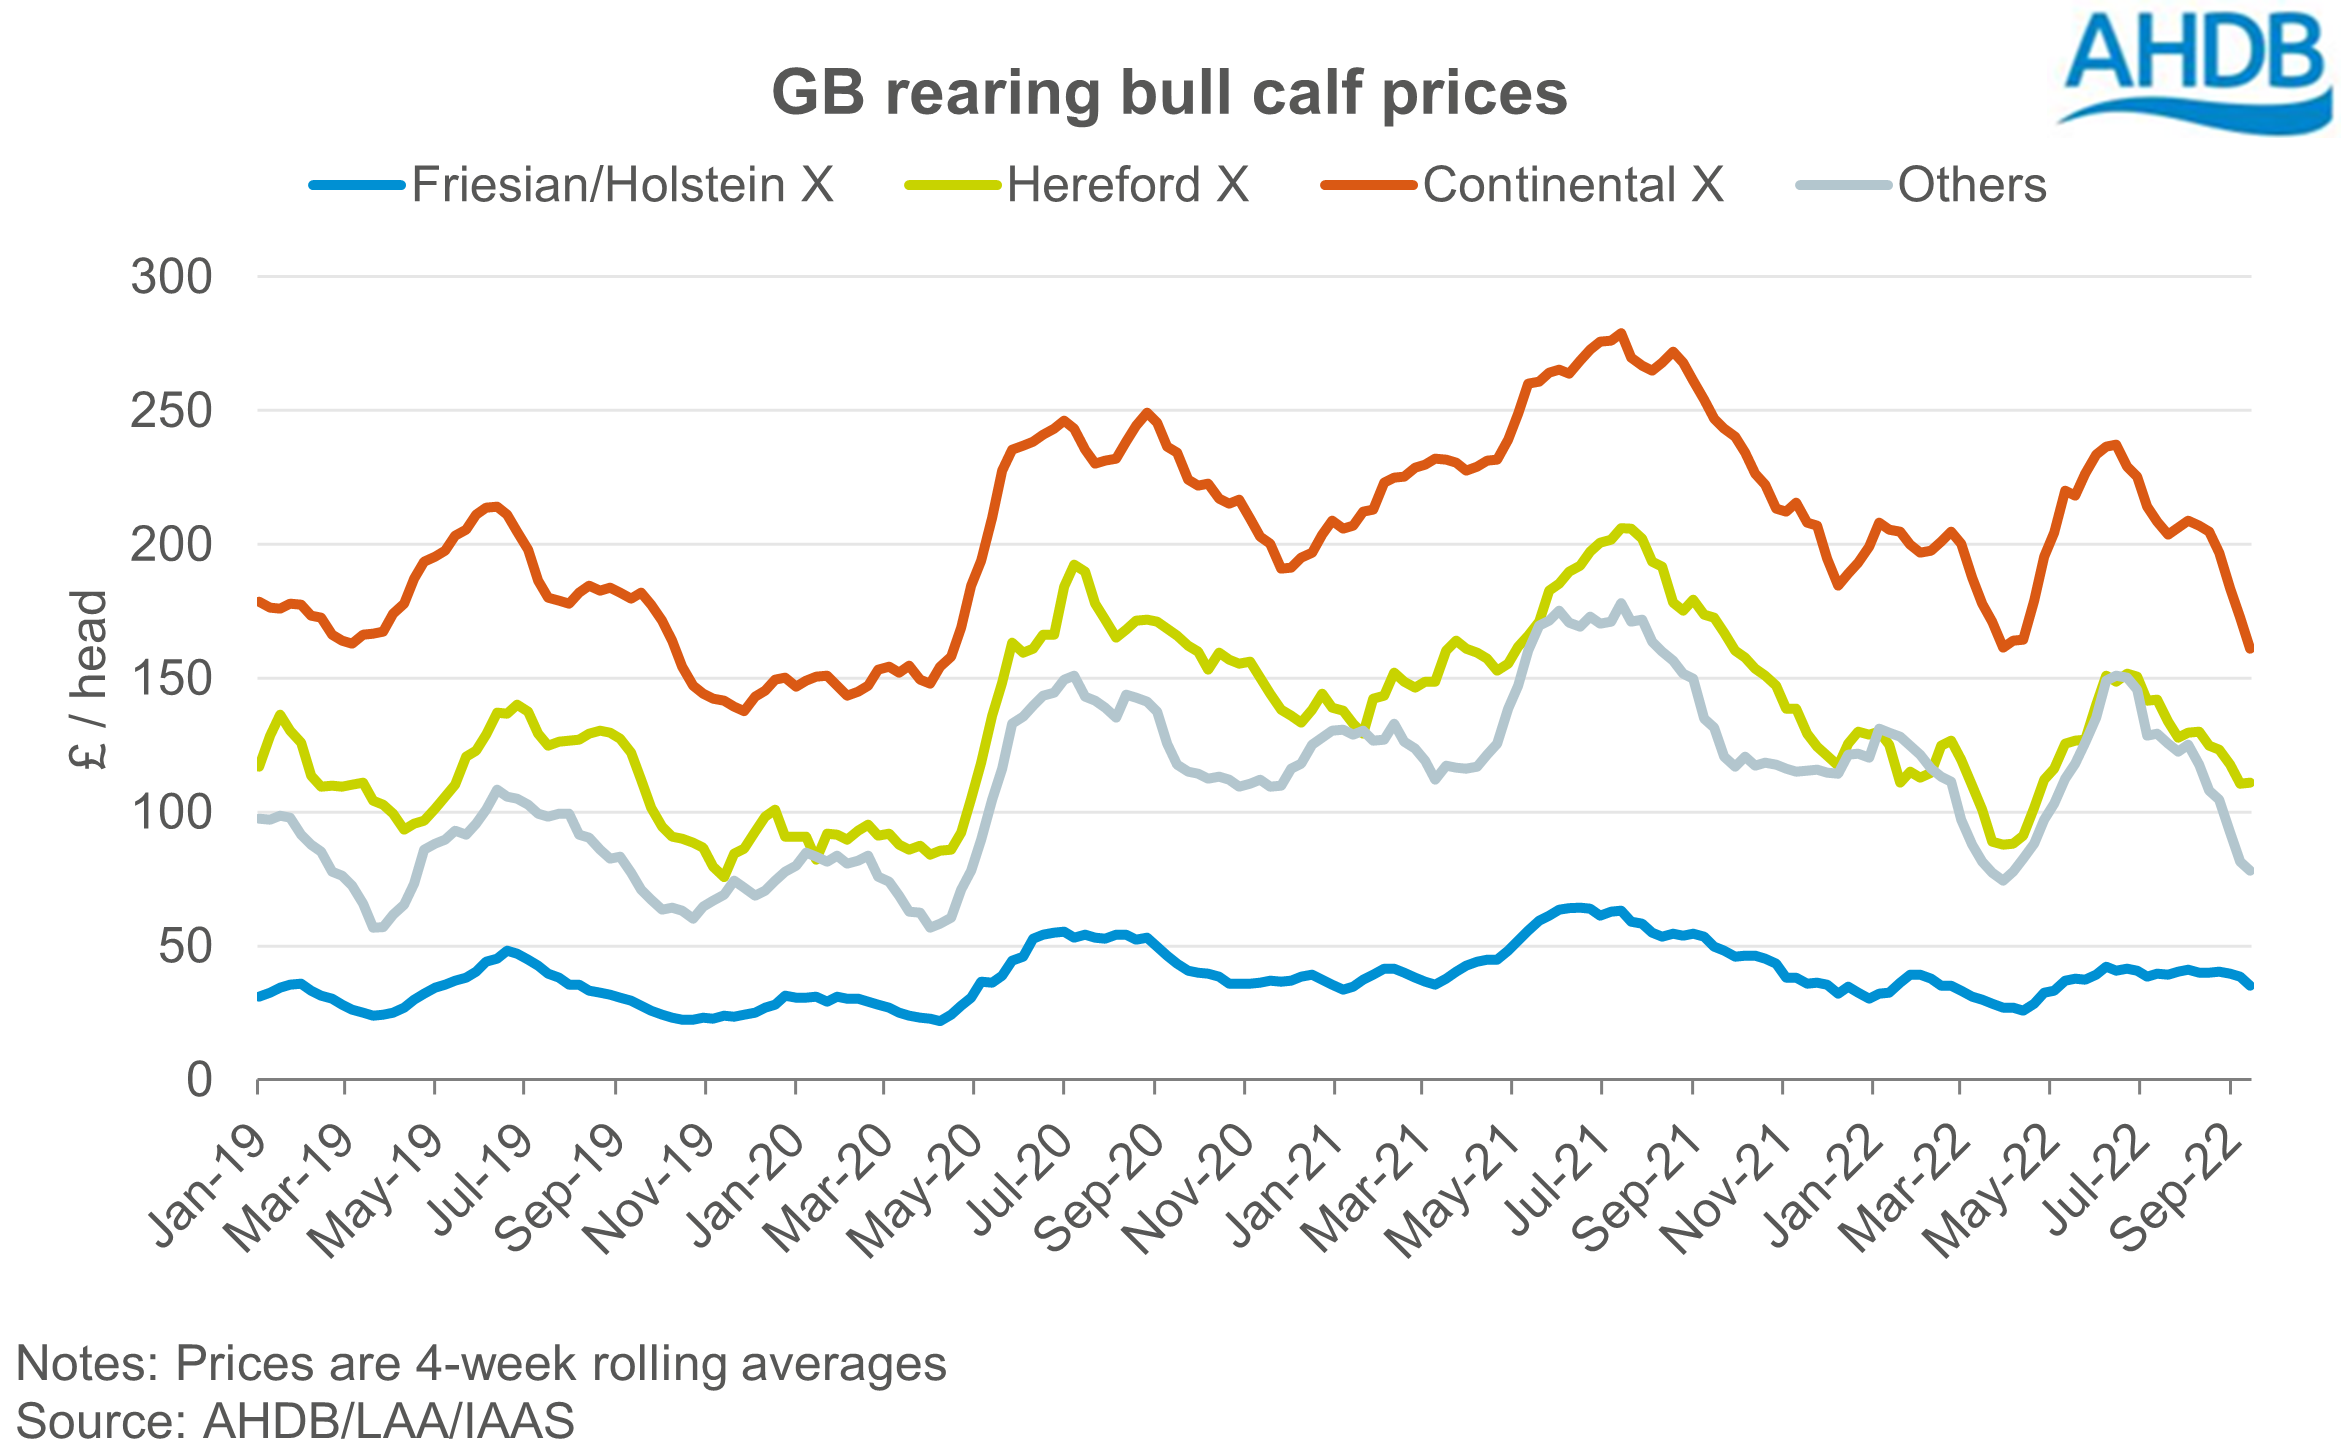 Graph showing average GB rearing bull calf prices